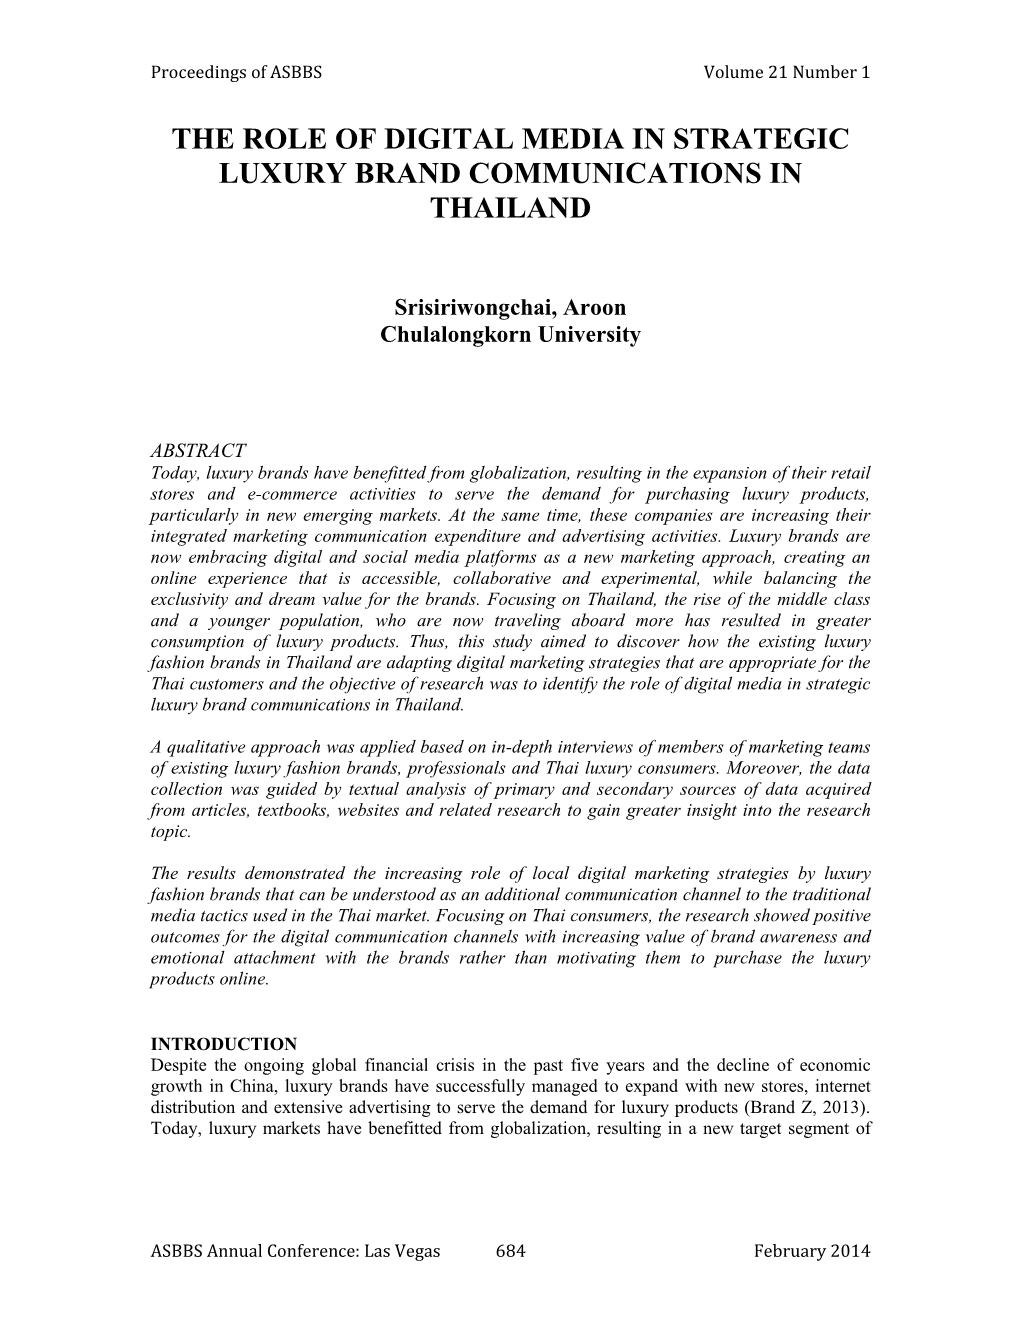 The Role of Digital Media in Strategic Luxury Brand Communications in Thailand